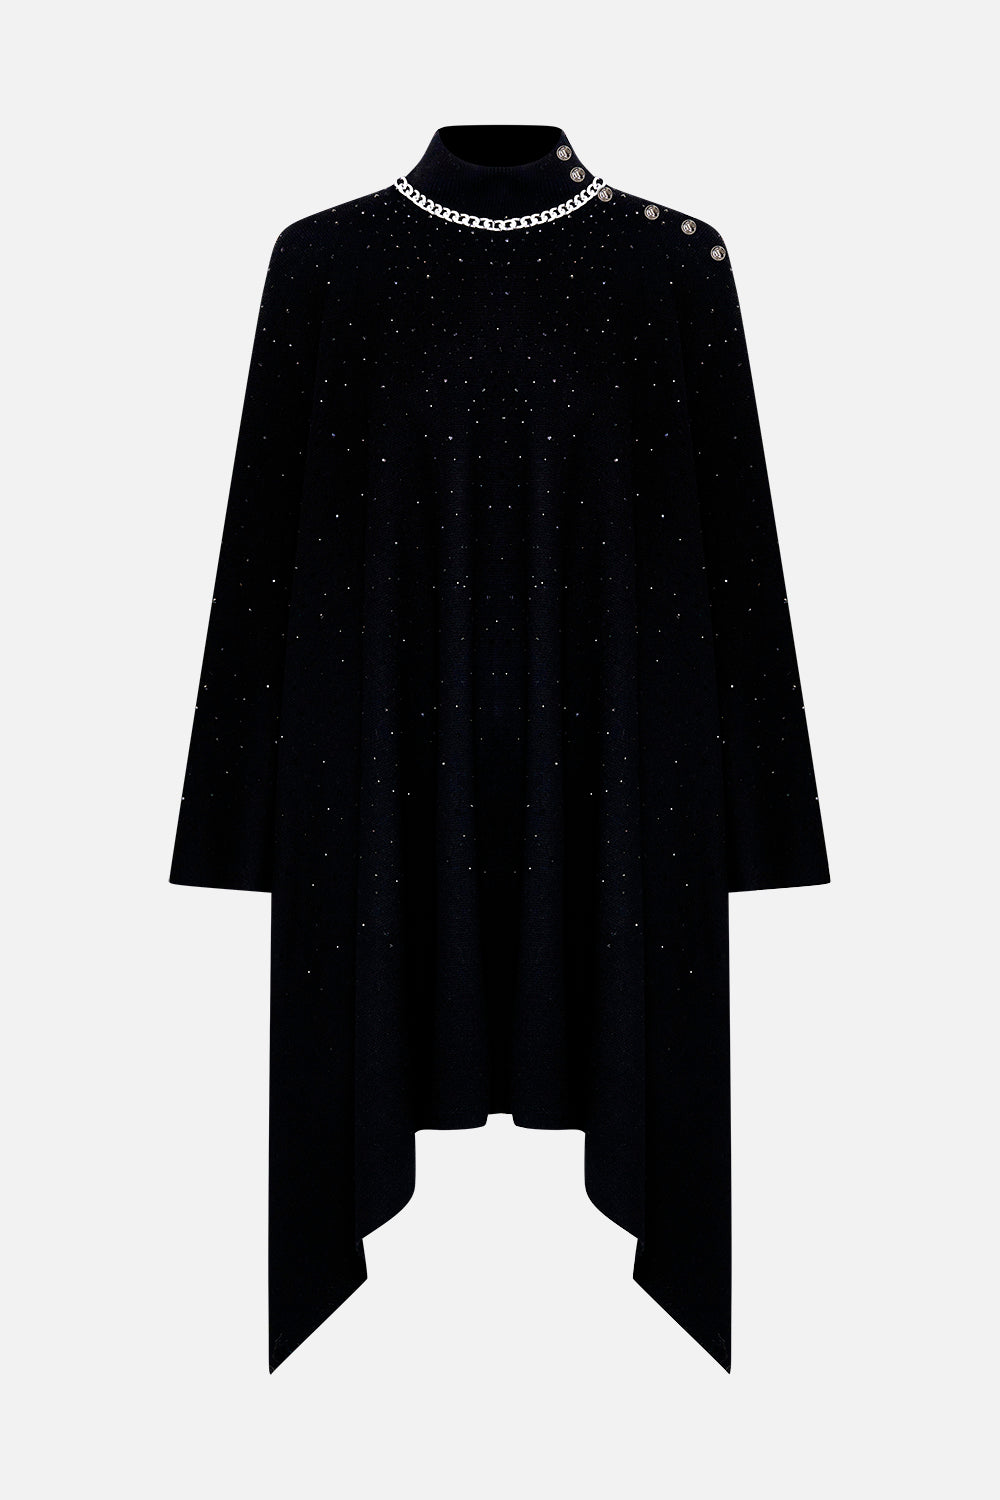 Product view of CAMILLA black knit poncho in Chaos Magic 